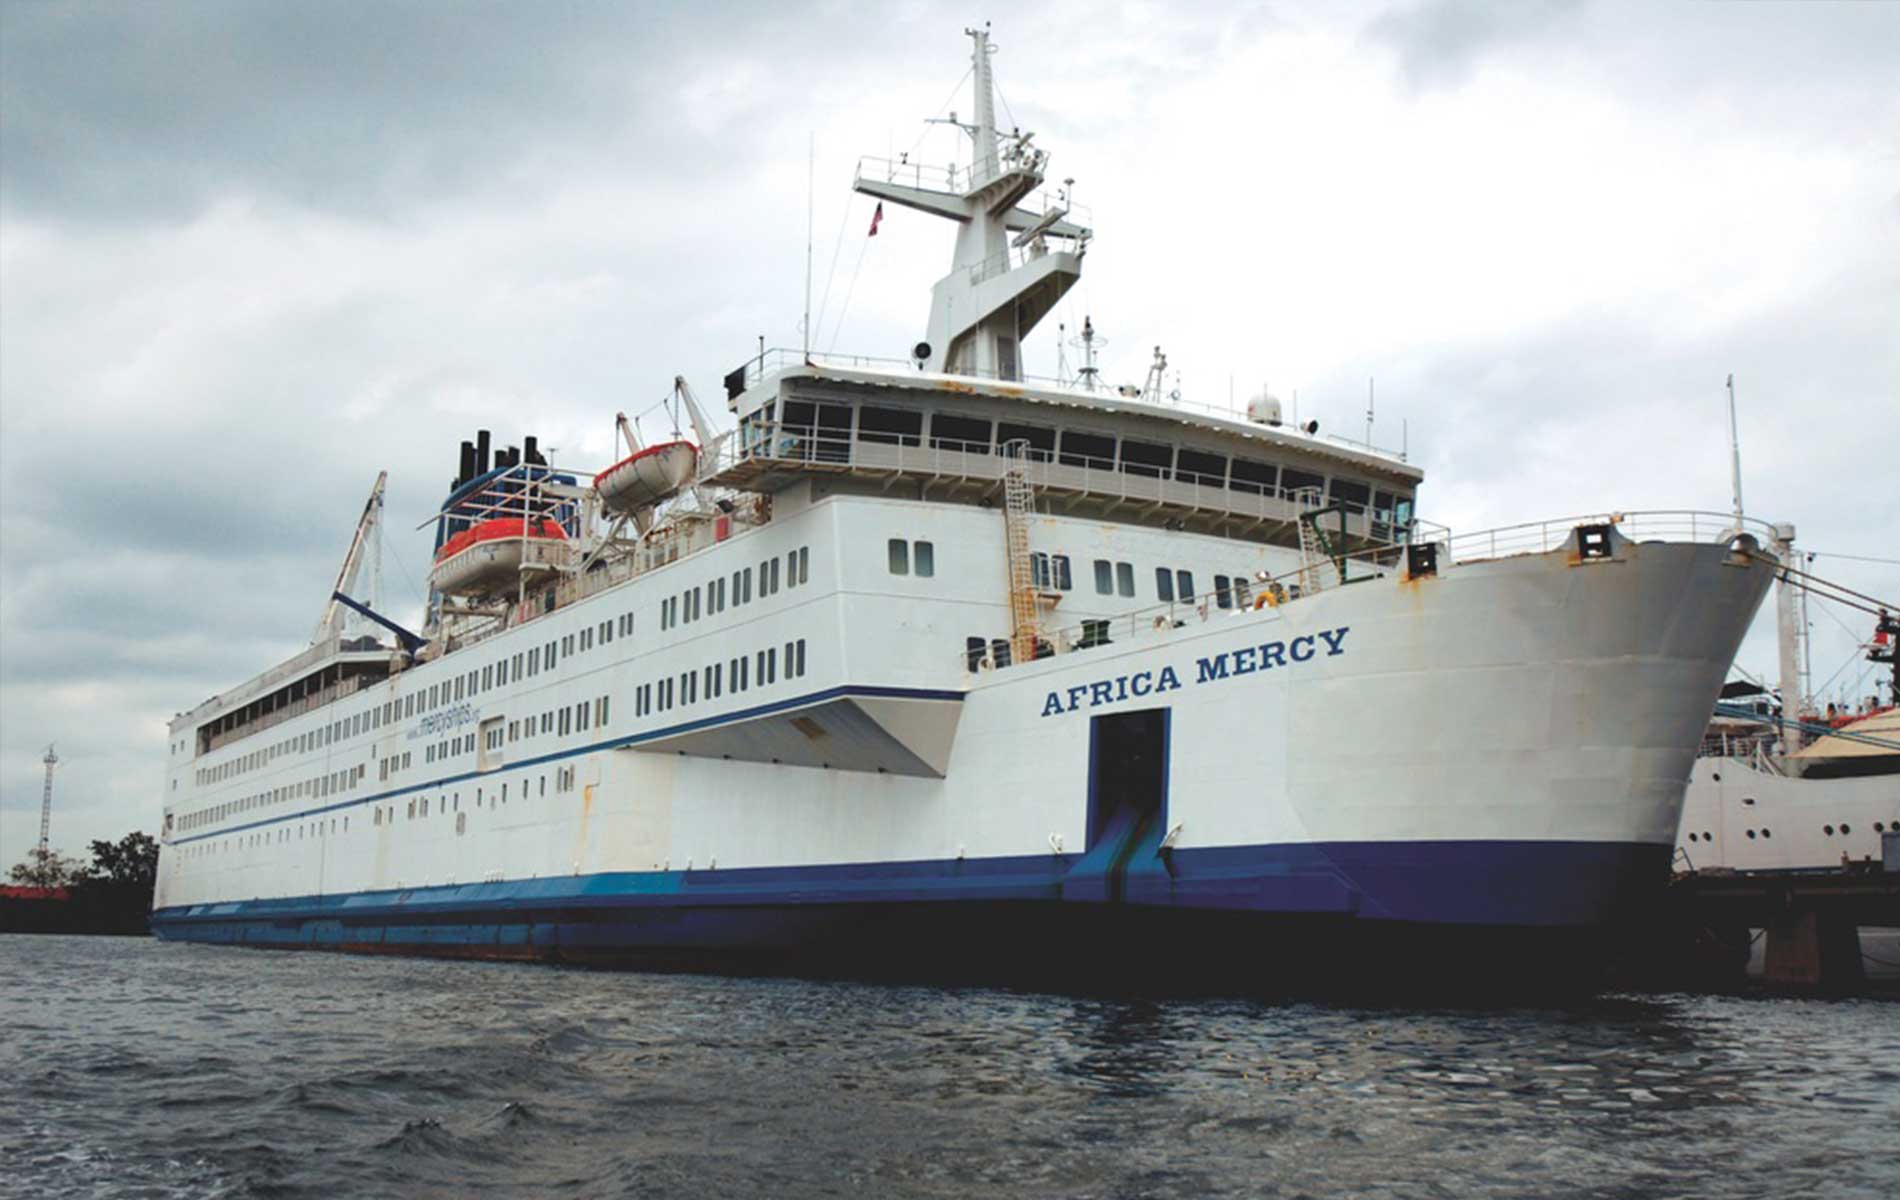 Blue Skies Ahead with Mercy Ships at the Helm